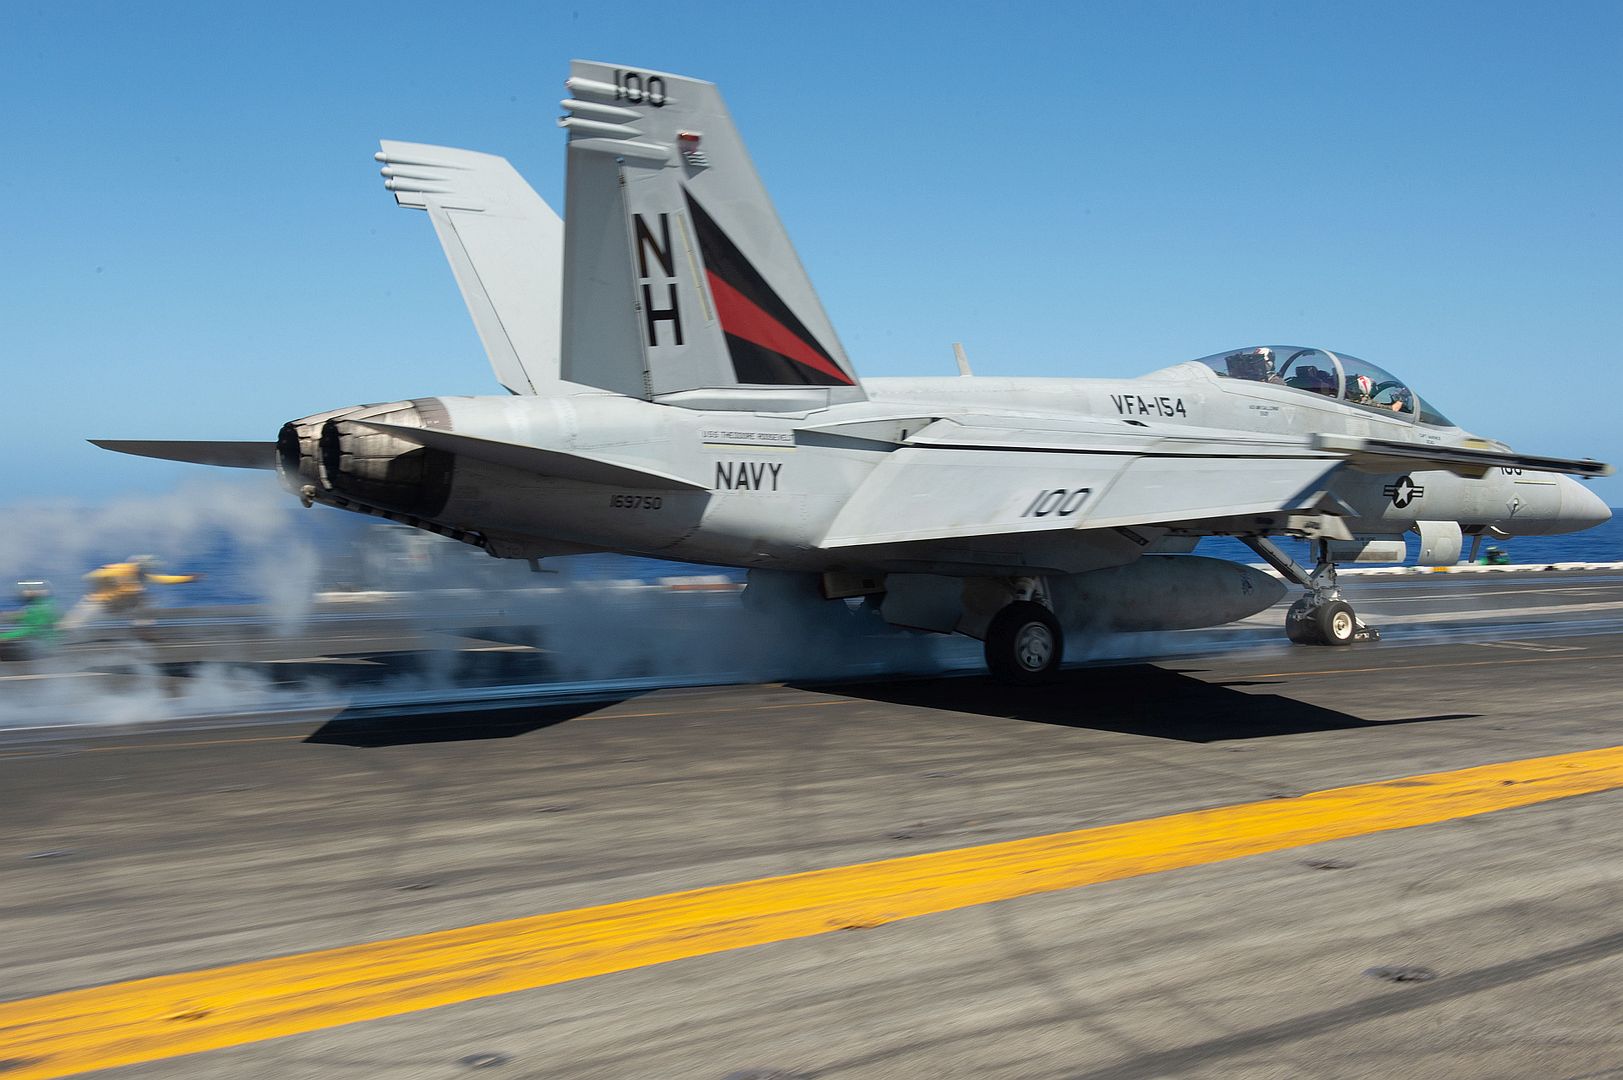  Takes Off From The Flight Deck Of The Aircraft Carrier USS Theodore Roosevelt